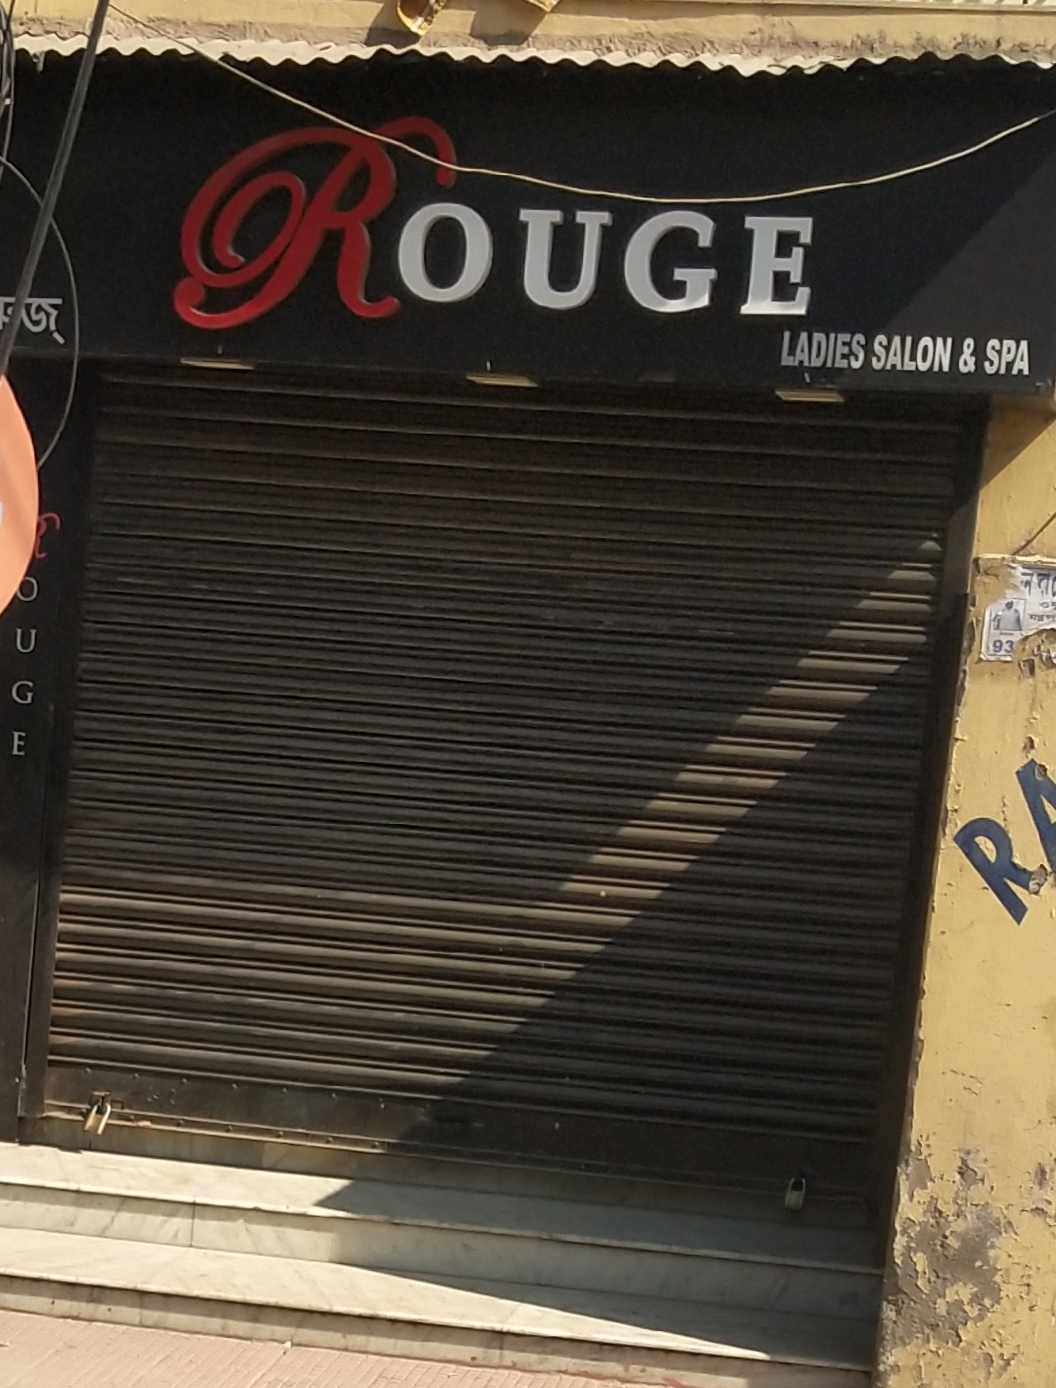 ROUGE LADIES SALON AND SPA